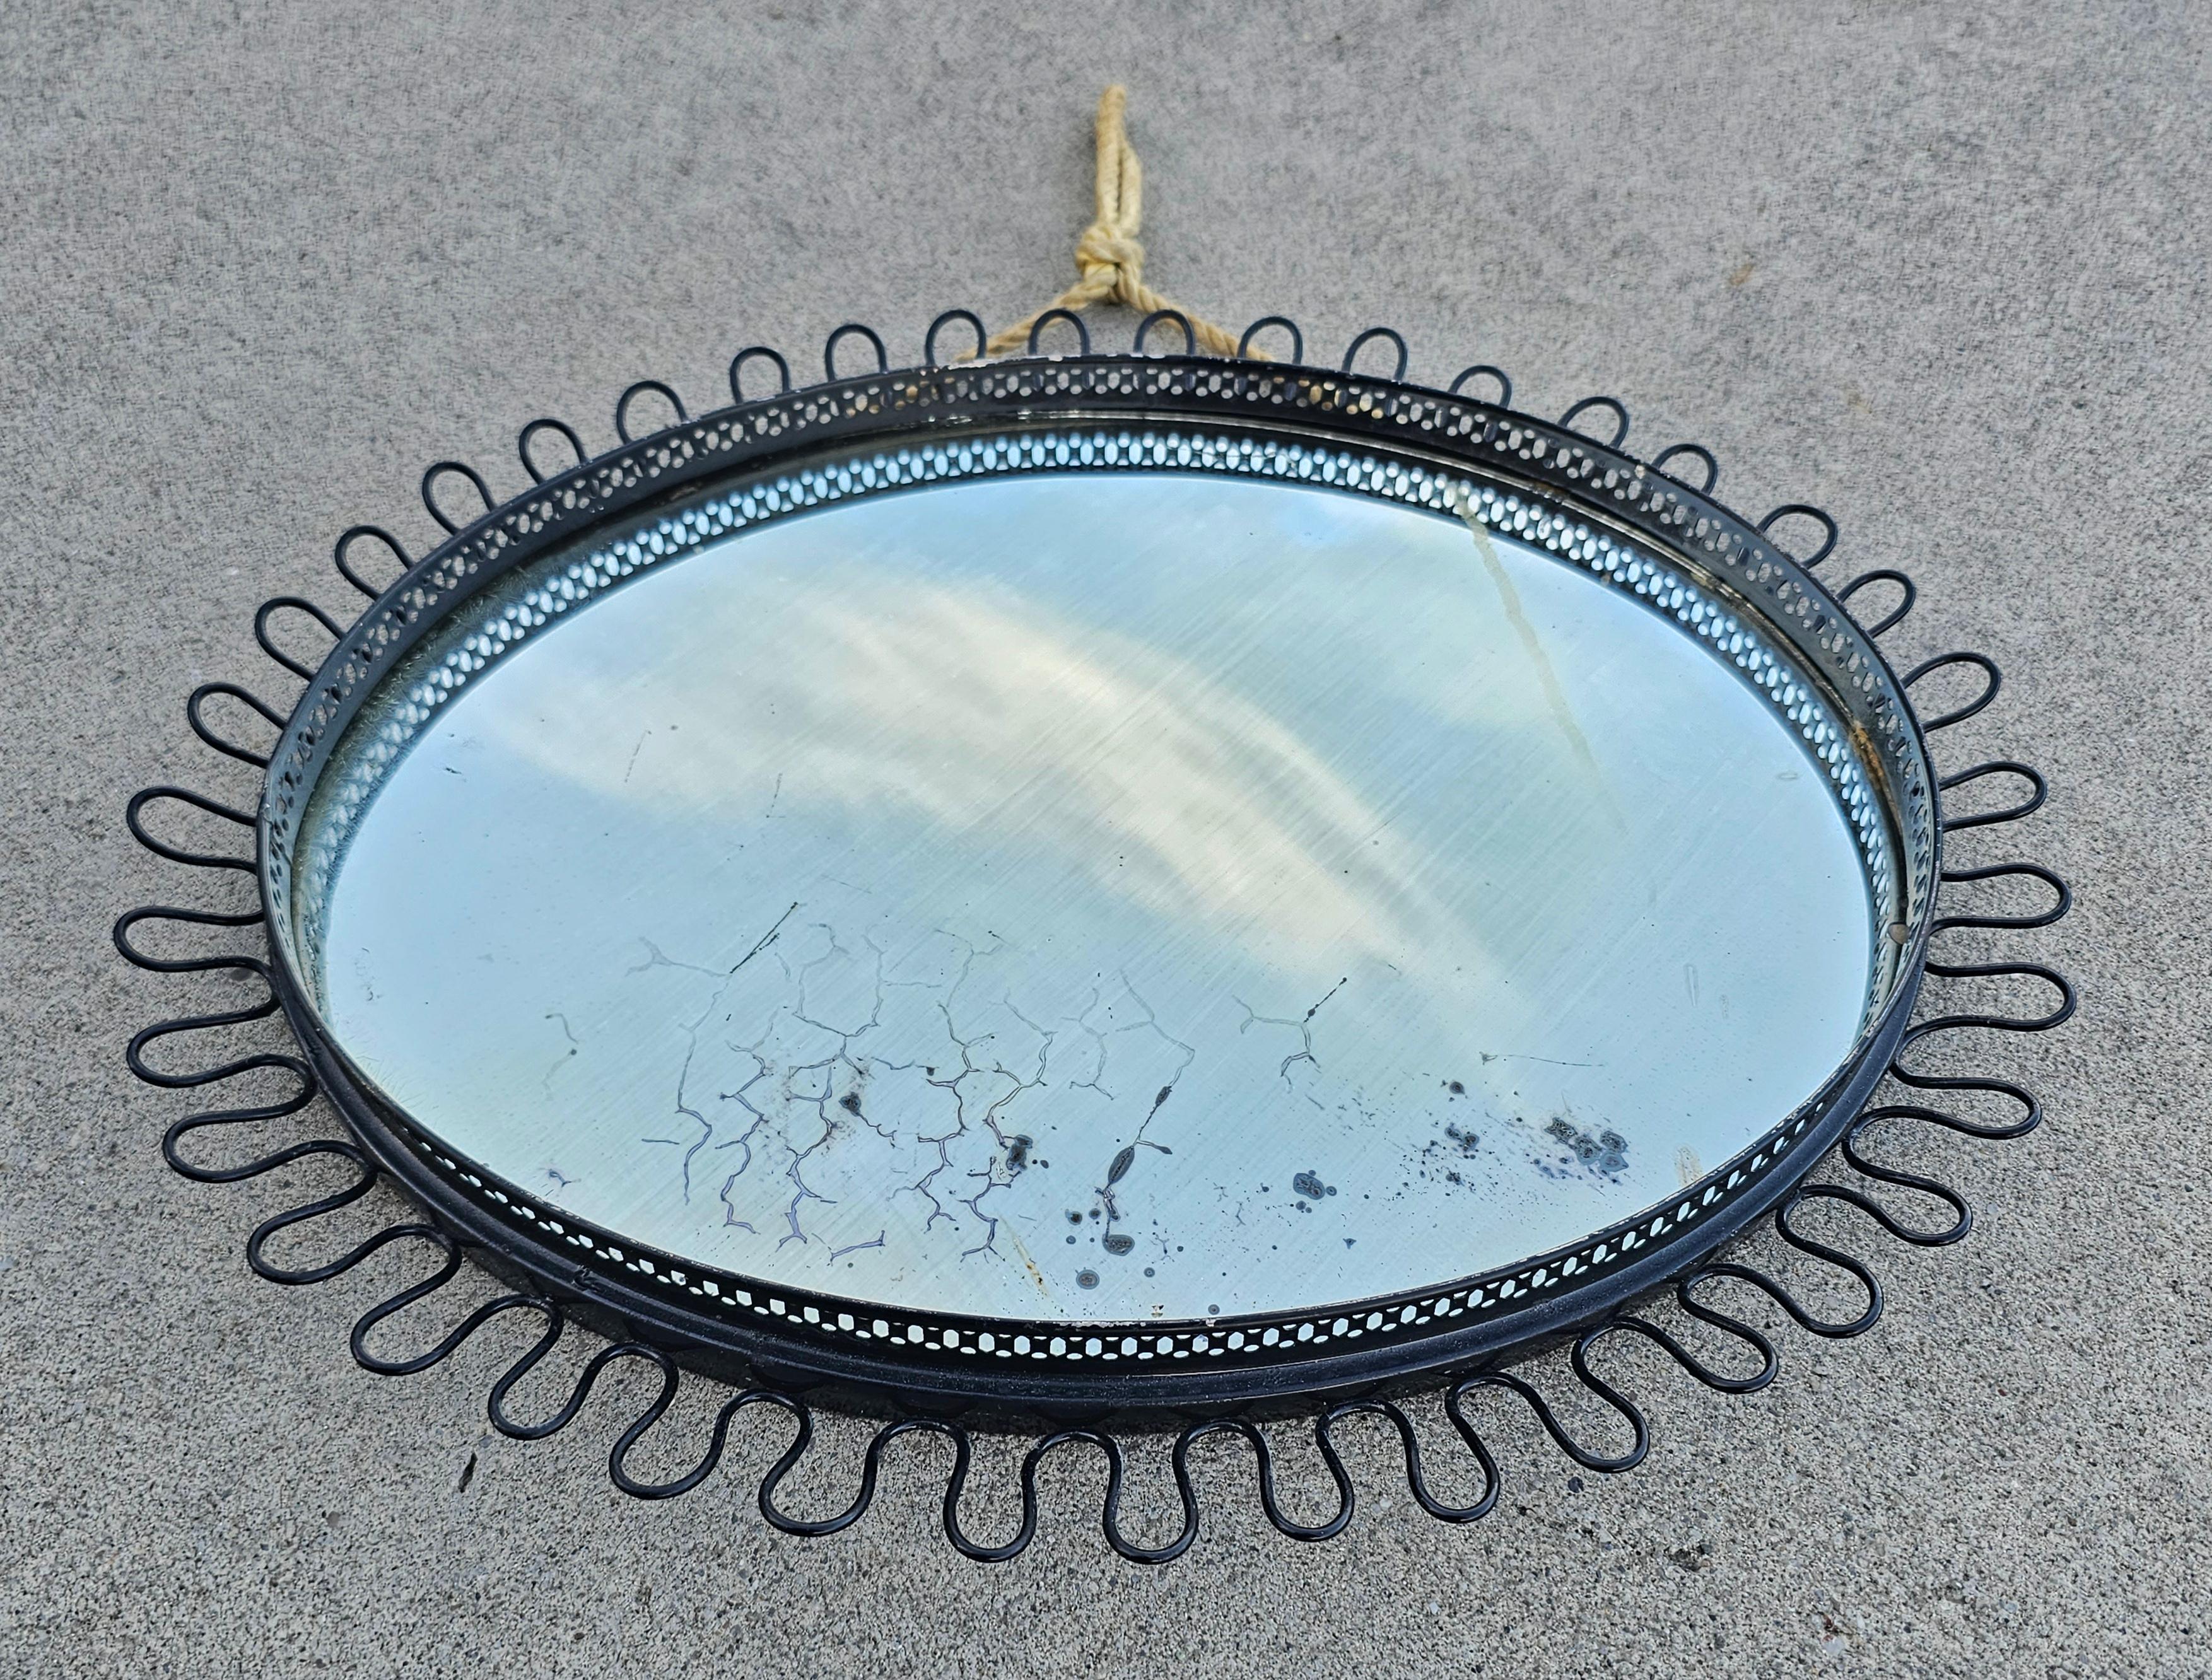 In this listing you will find beautiful and rare Mid Century Modern Oval Sunburst Mirror designed by Josef Frank. It comes with a black metal frame and the rope that allow you to mount it on the wall. Made in West Germany in 1960s.

Good vintage